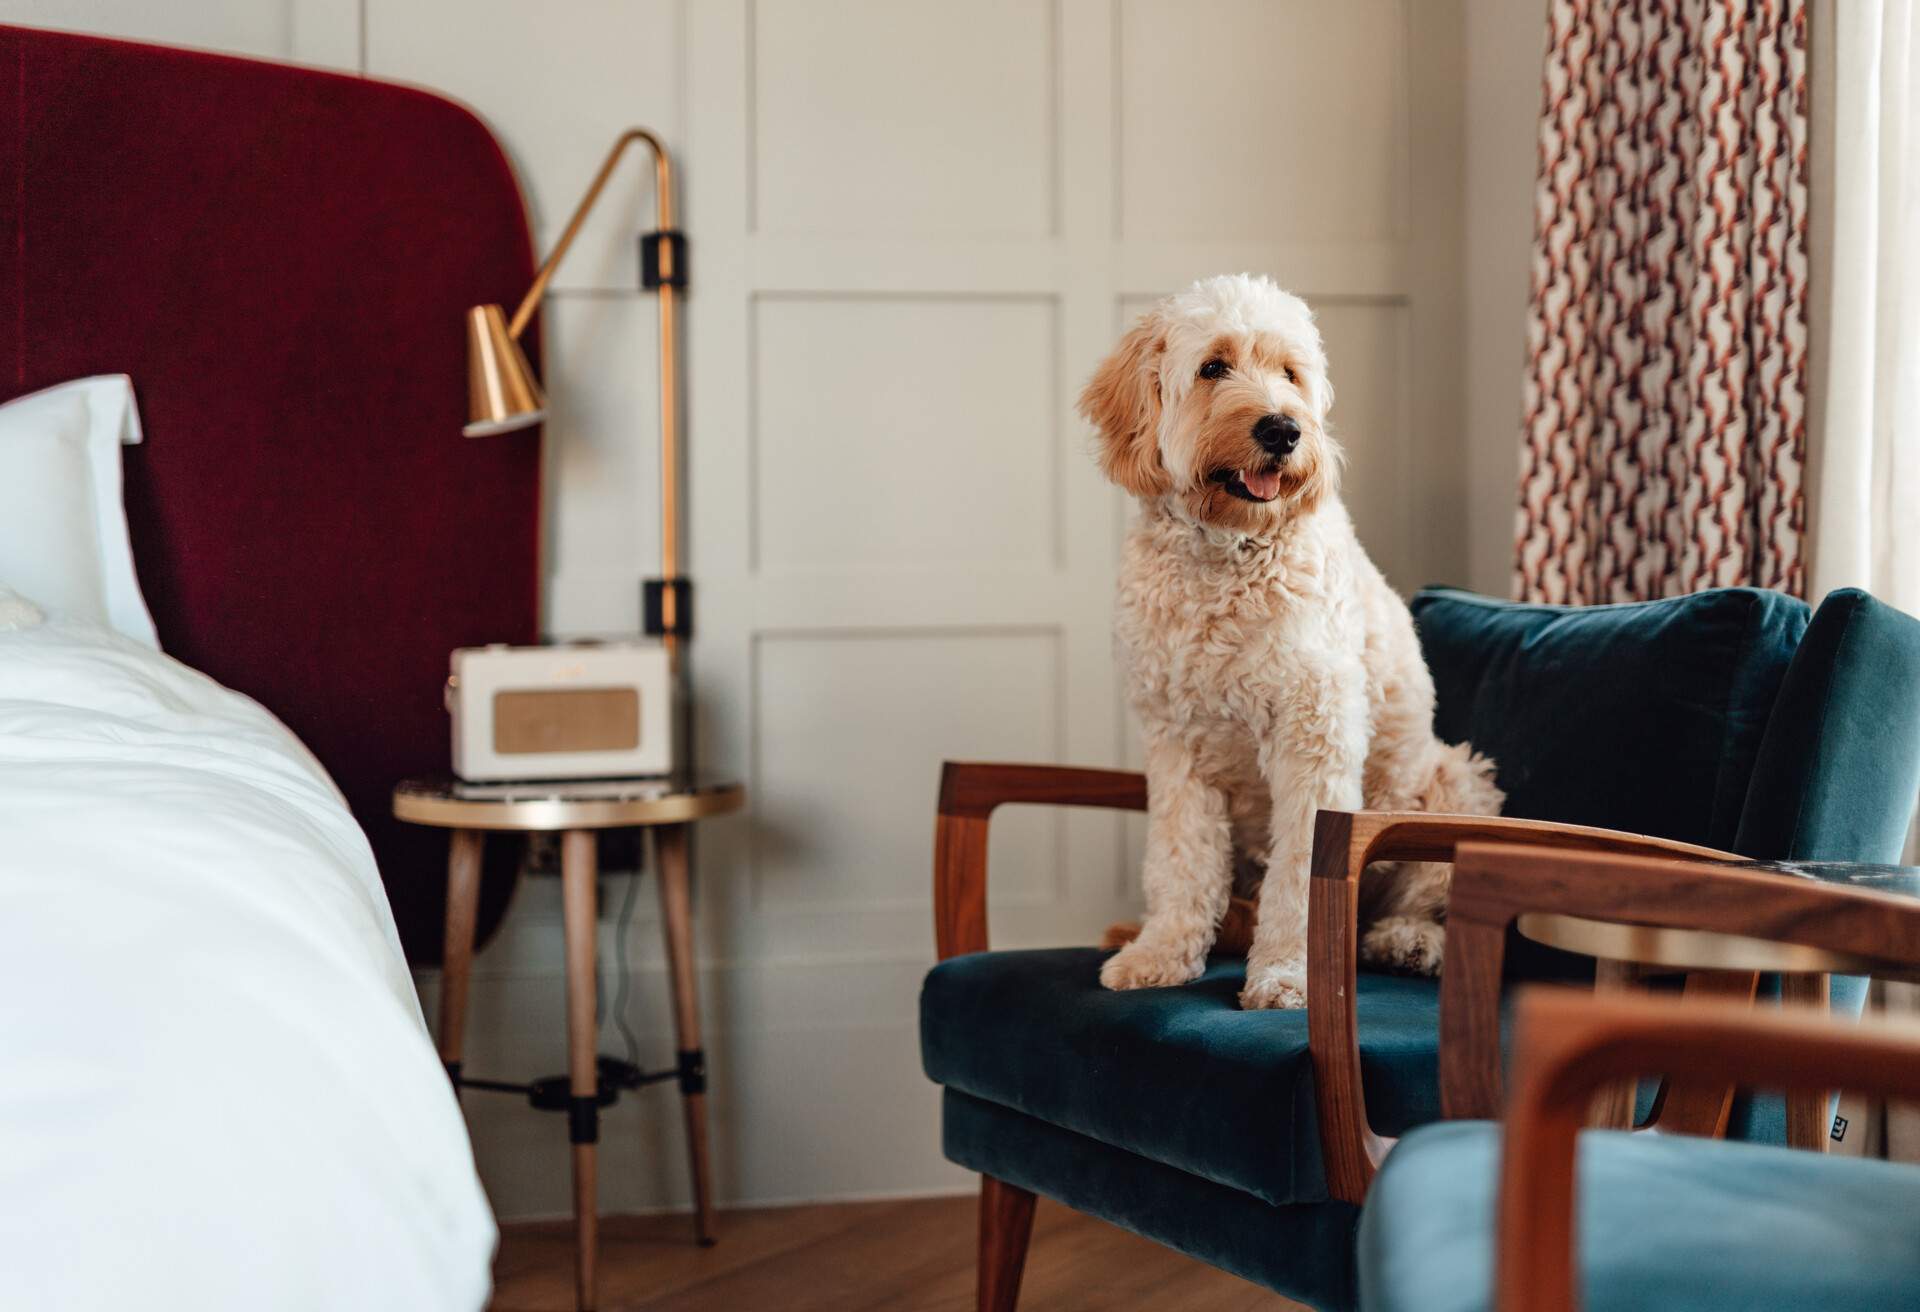 THEME_HOTEL_PETS_DOG_GettyImages